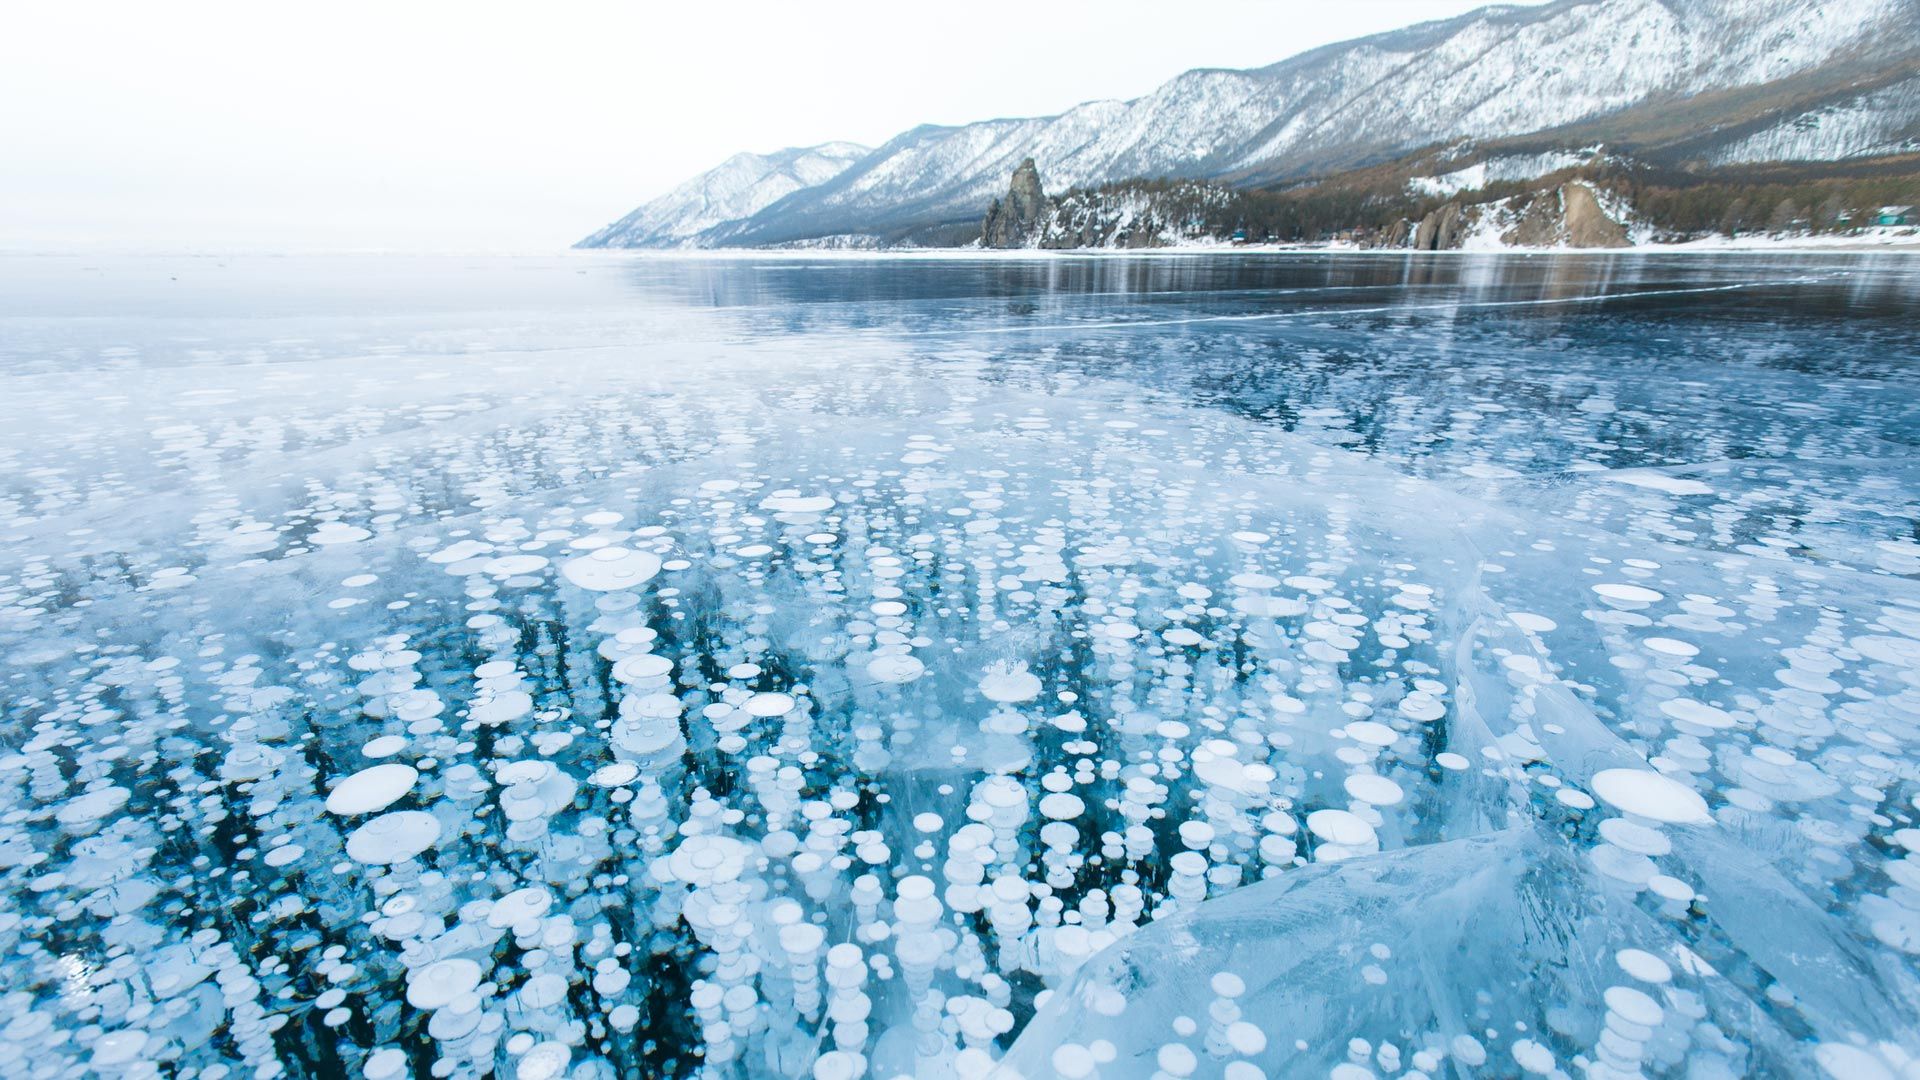 The Ice Of Lake Baikal With Bubbles